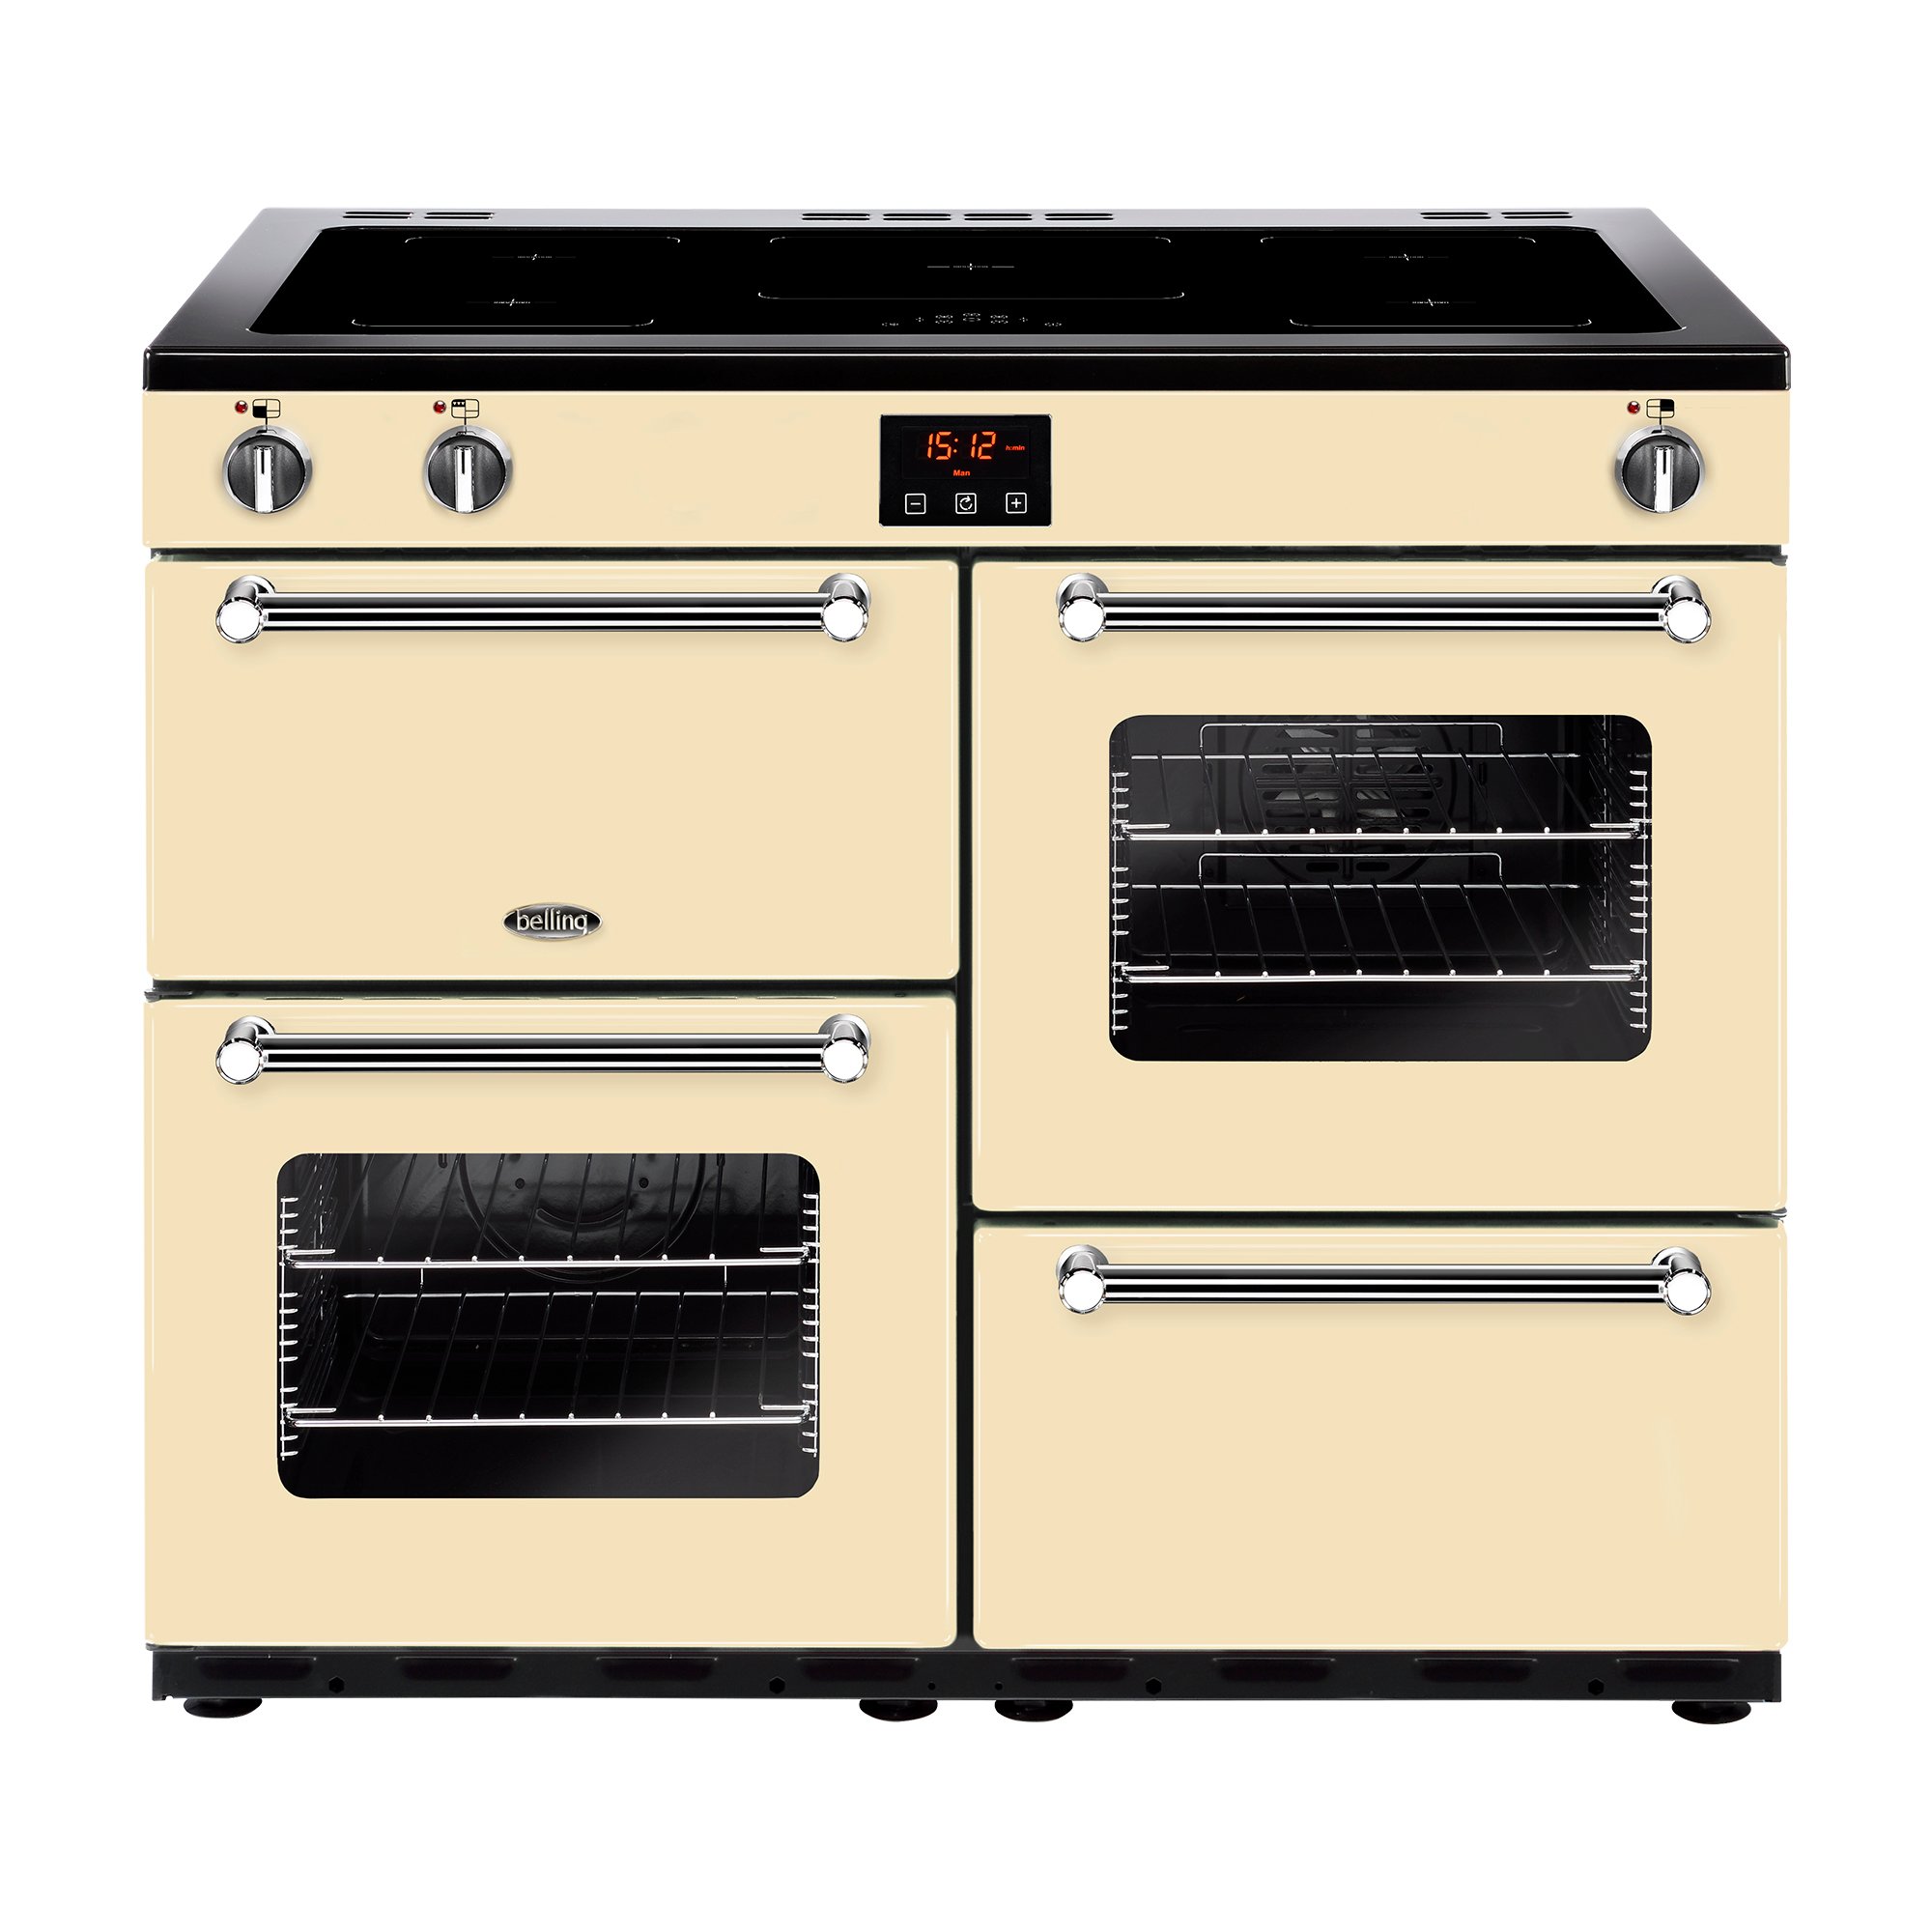 100cm induction range cooker with a 5 zone induction hob, variable rate electric grill, 2 conventional ovens and a main fanned oven.Requires 32A connection.